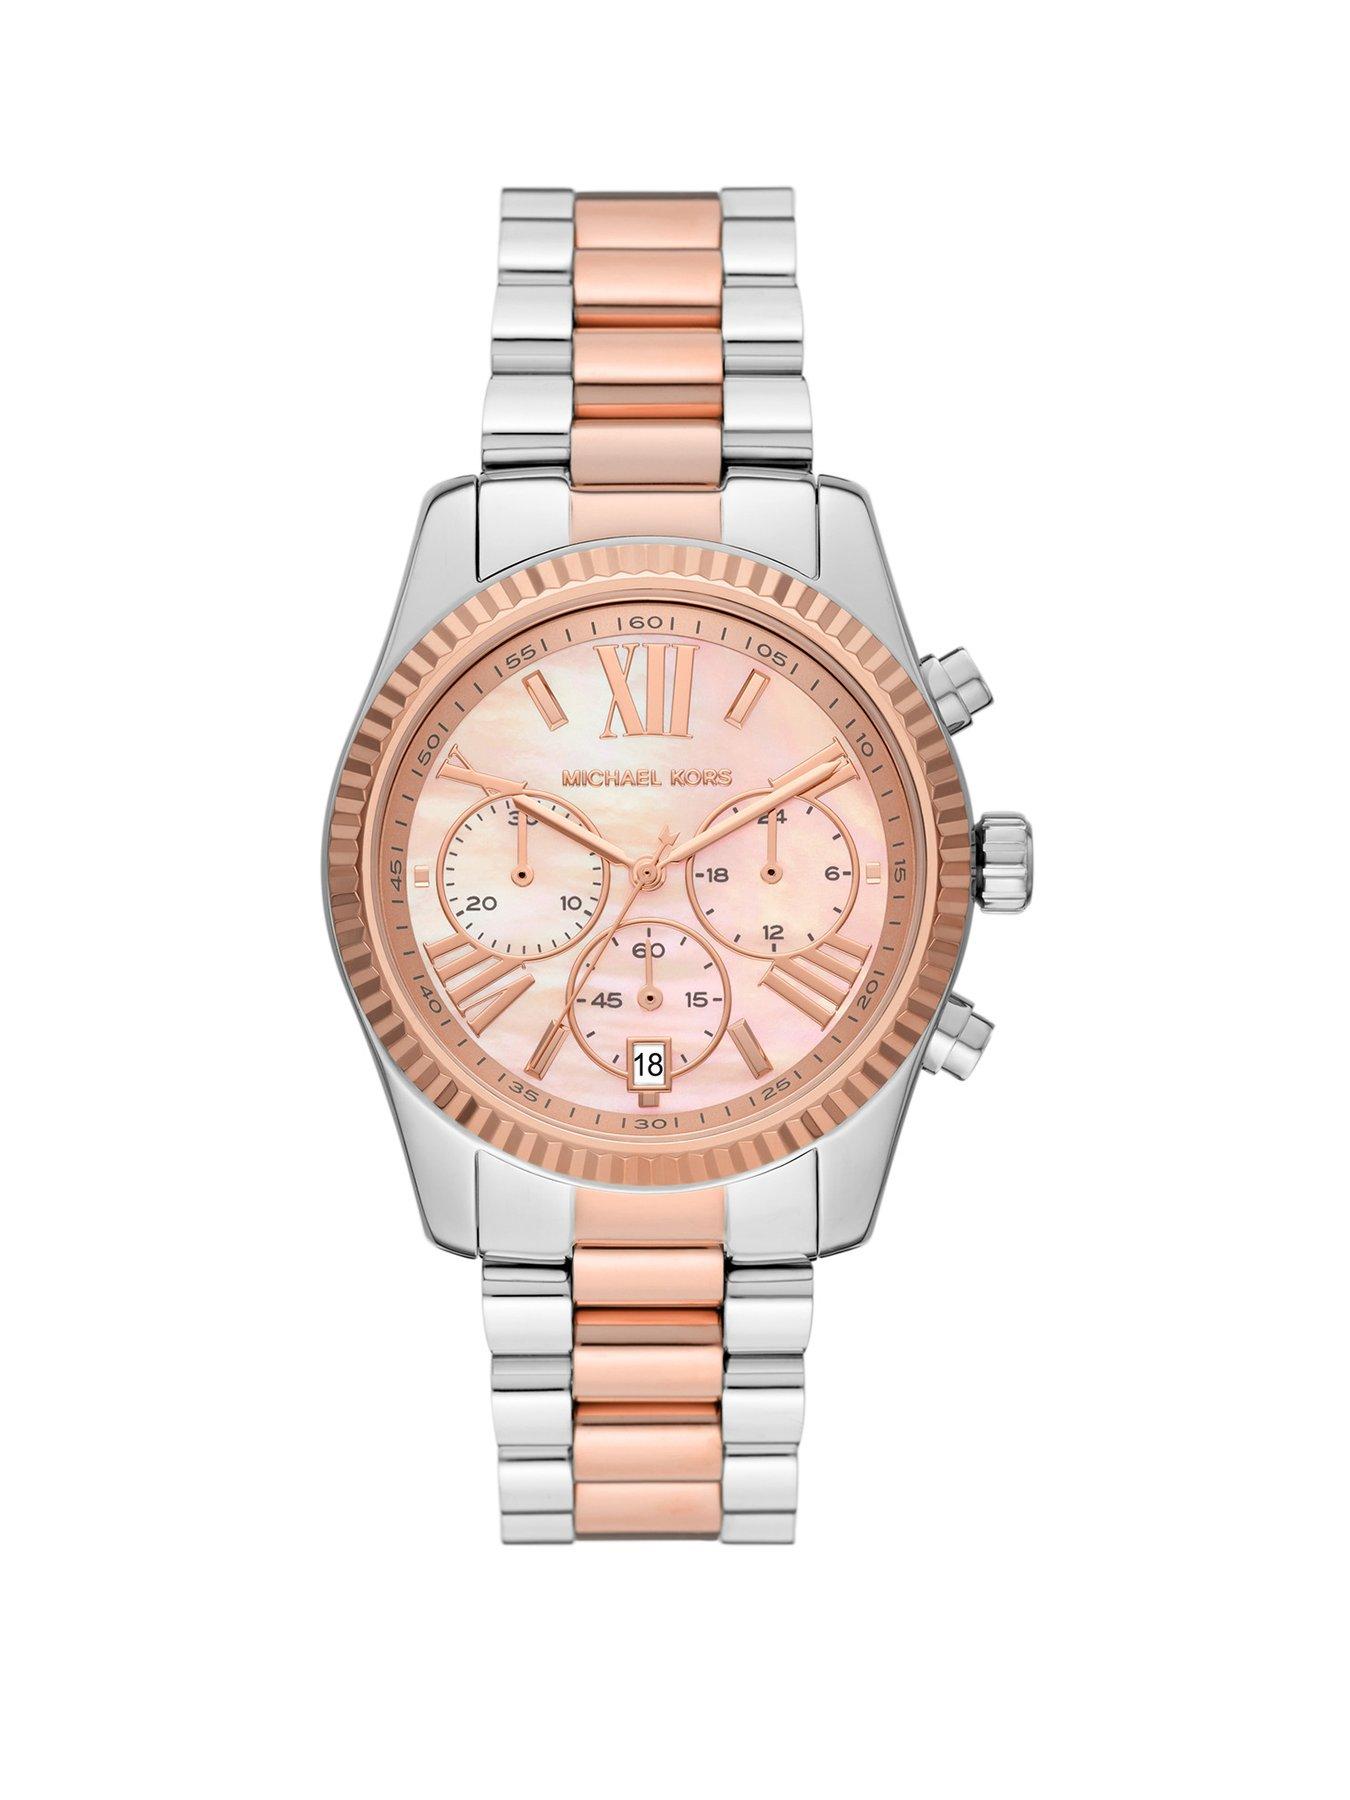 All Offers | Fashion | For Her | Michael kors | Watches | Jewellery &  watches | Women 